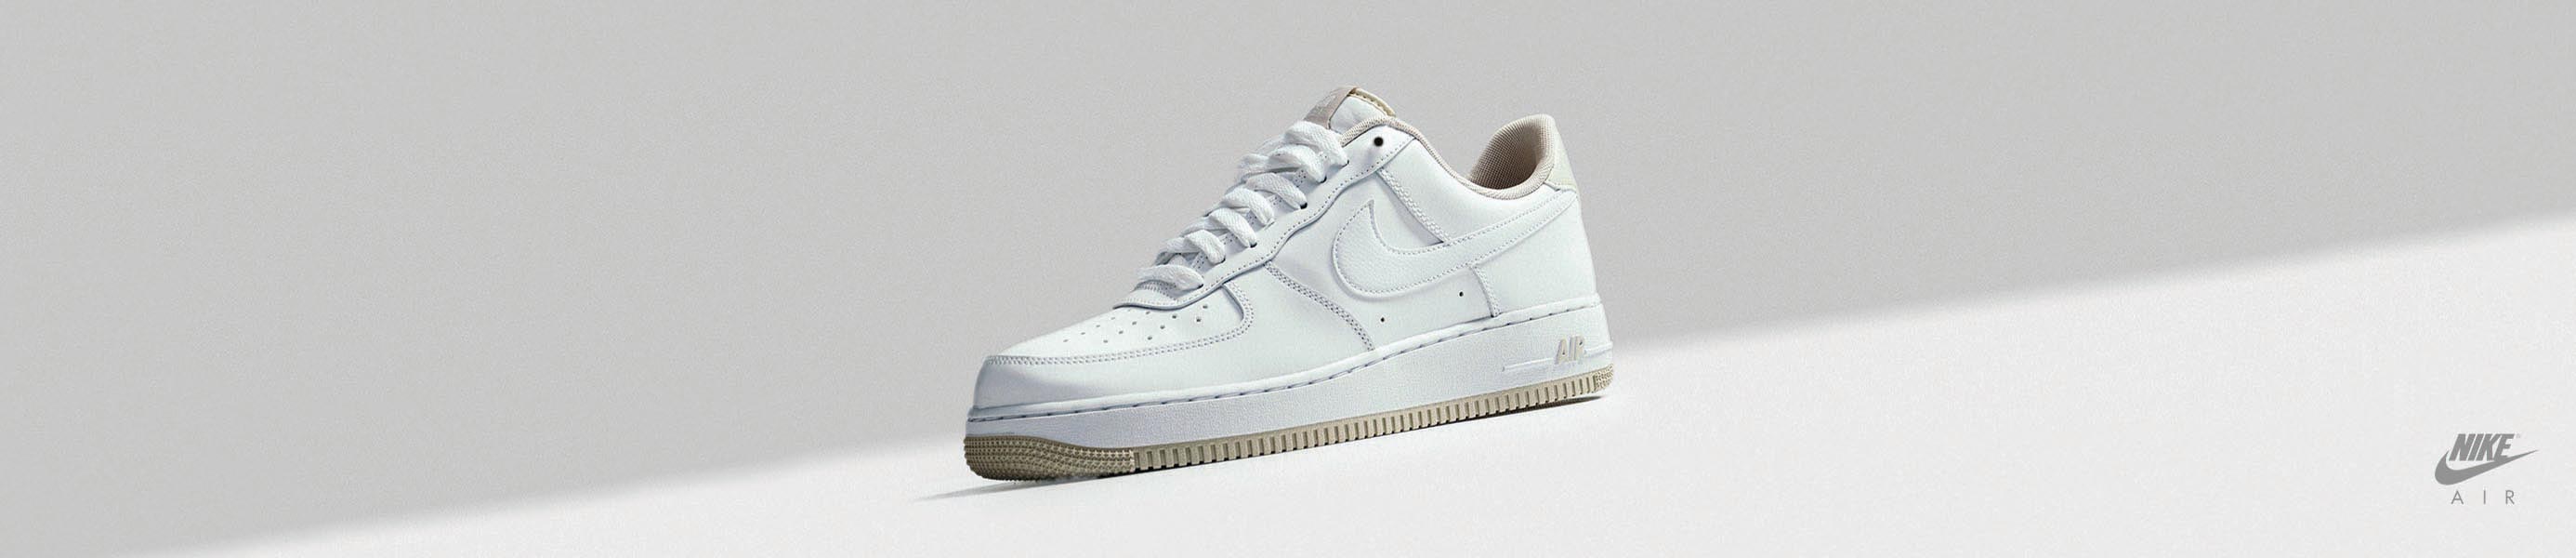 Shop NIKE Air Force 1 sneakers online at solebox